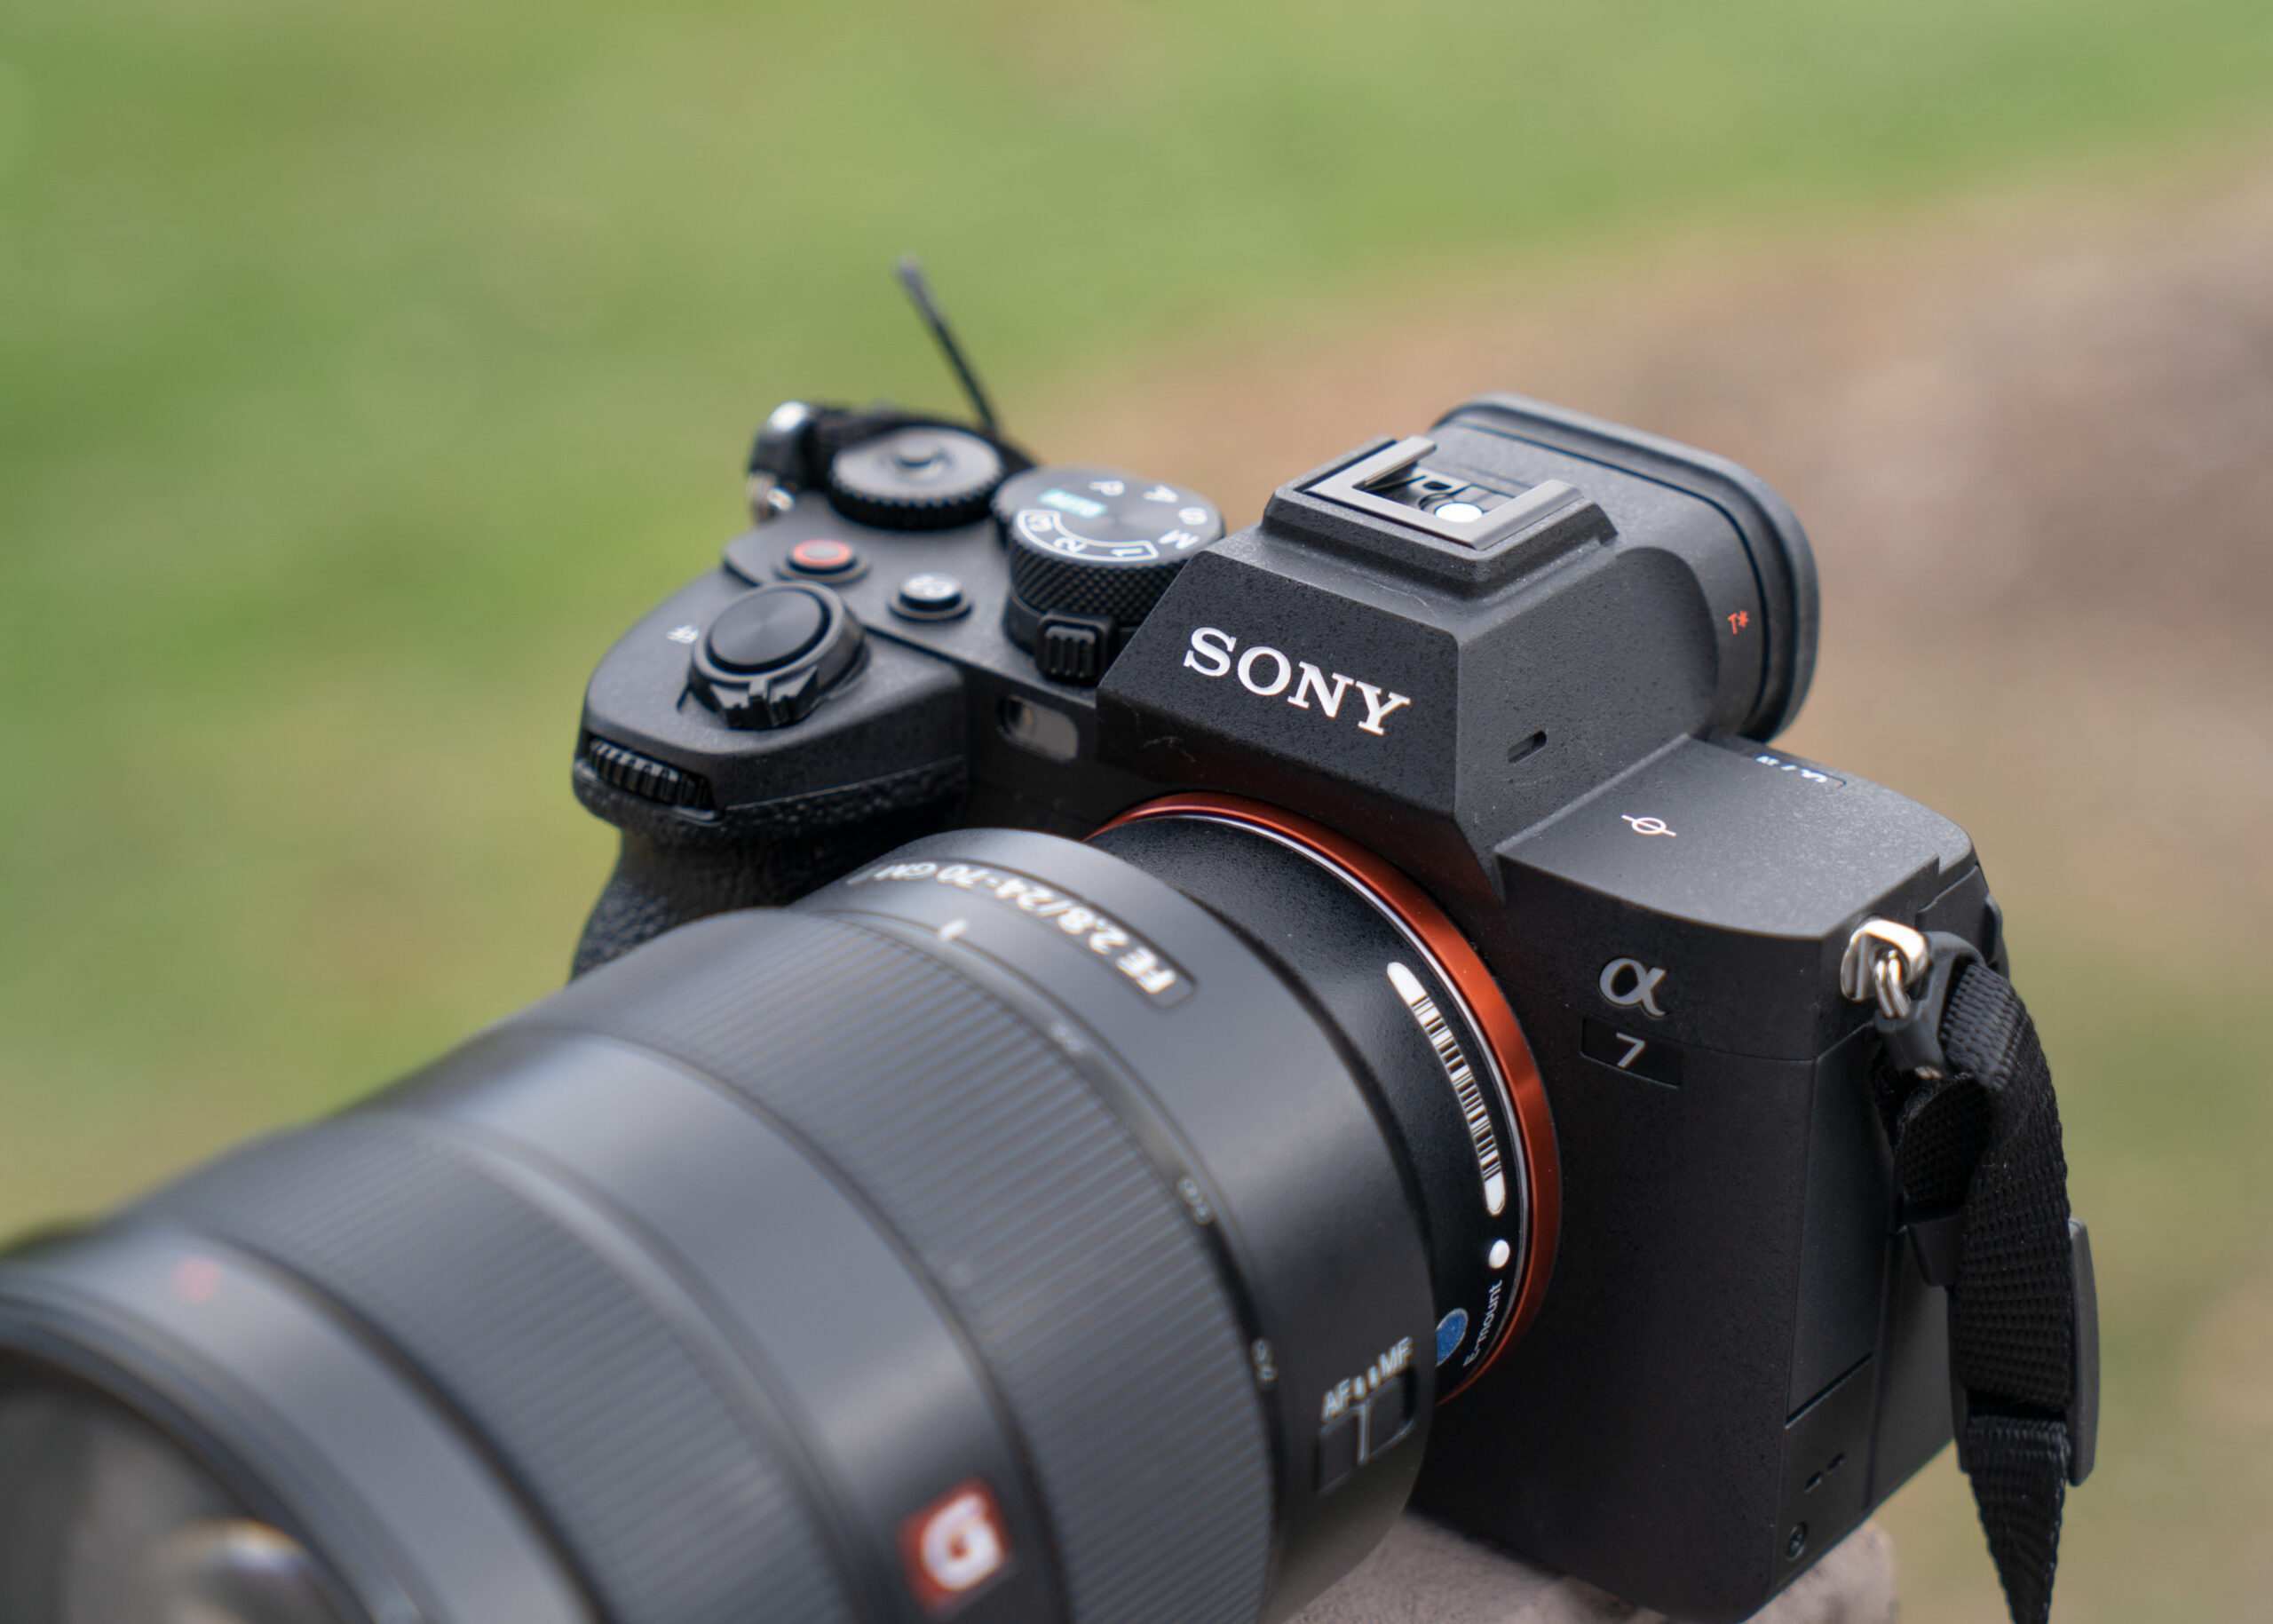 Improved Animal and Face Detection! Sony A7 IV Review